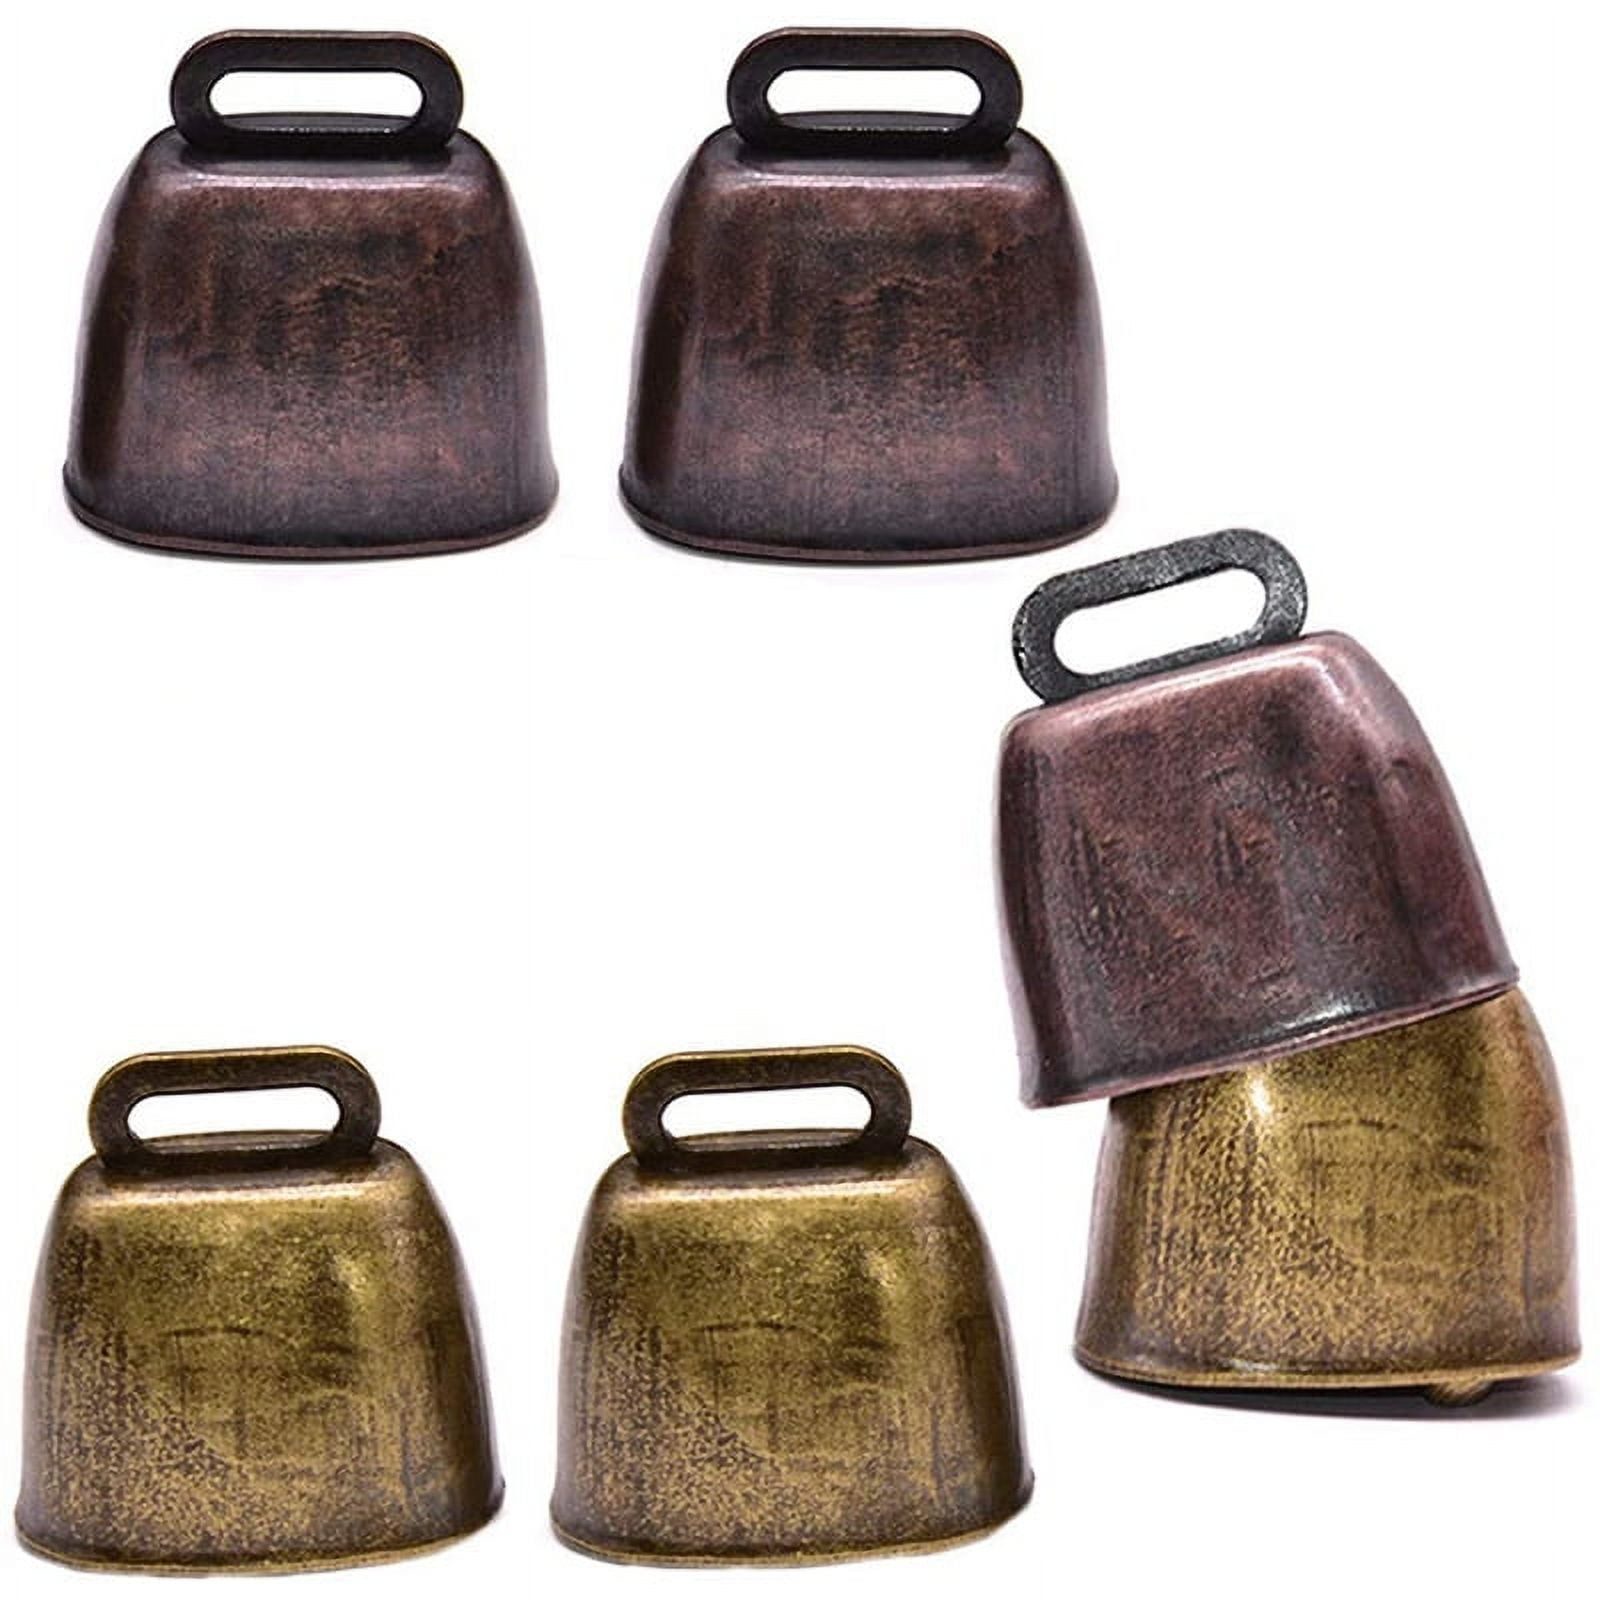 Red 3 Inch Cow Bell Noise Maker - GDJJ703 - IdeaStage Promotional Products